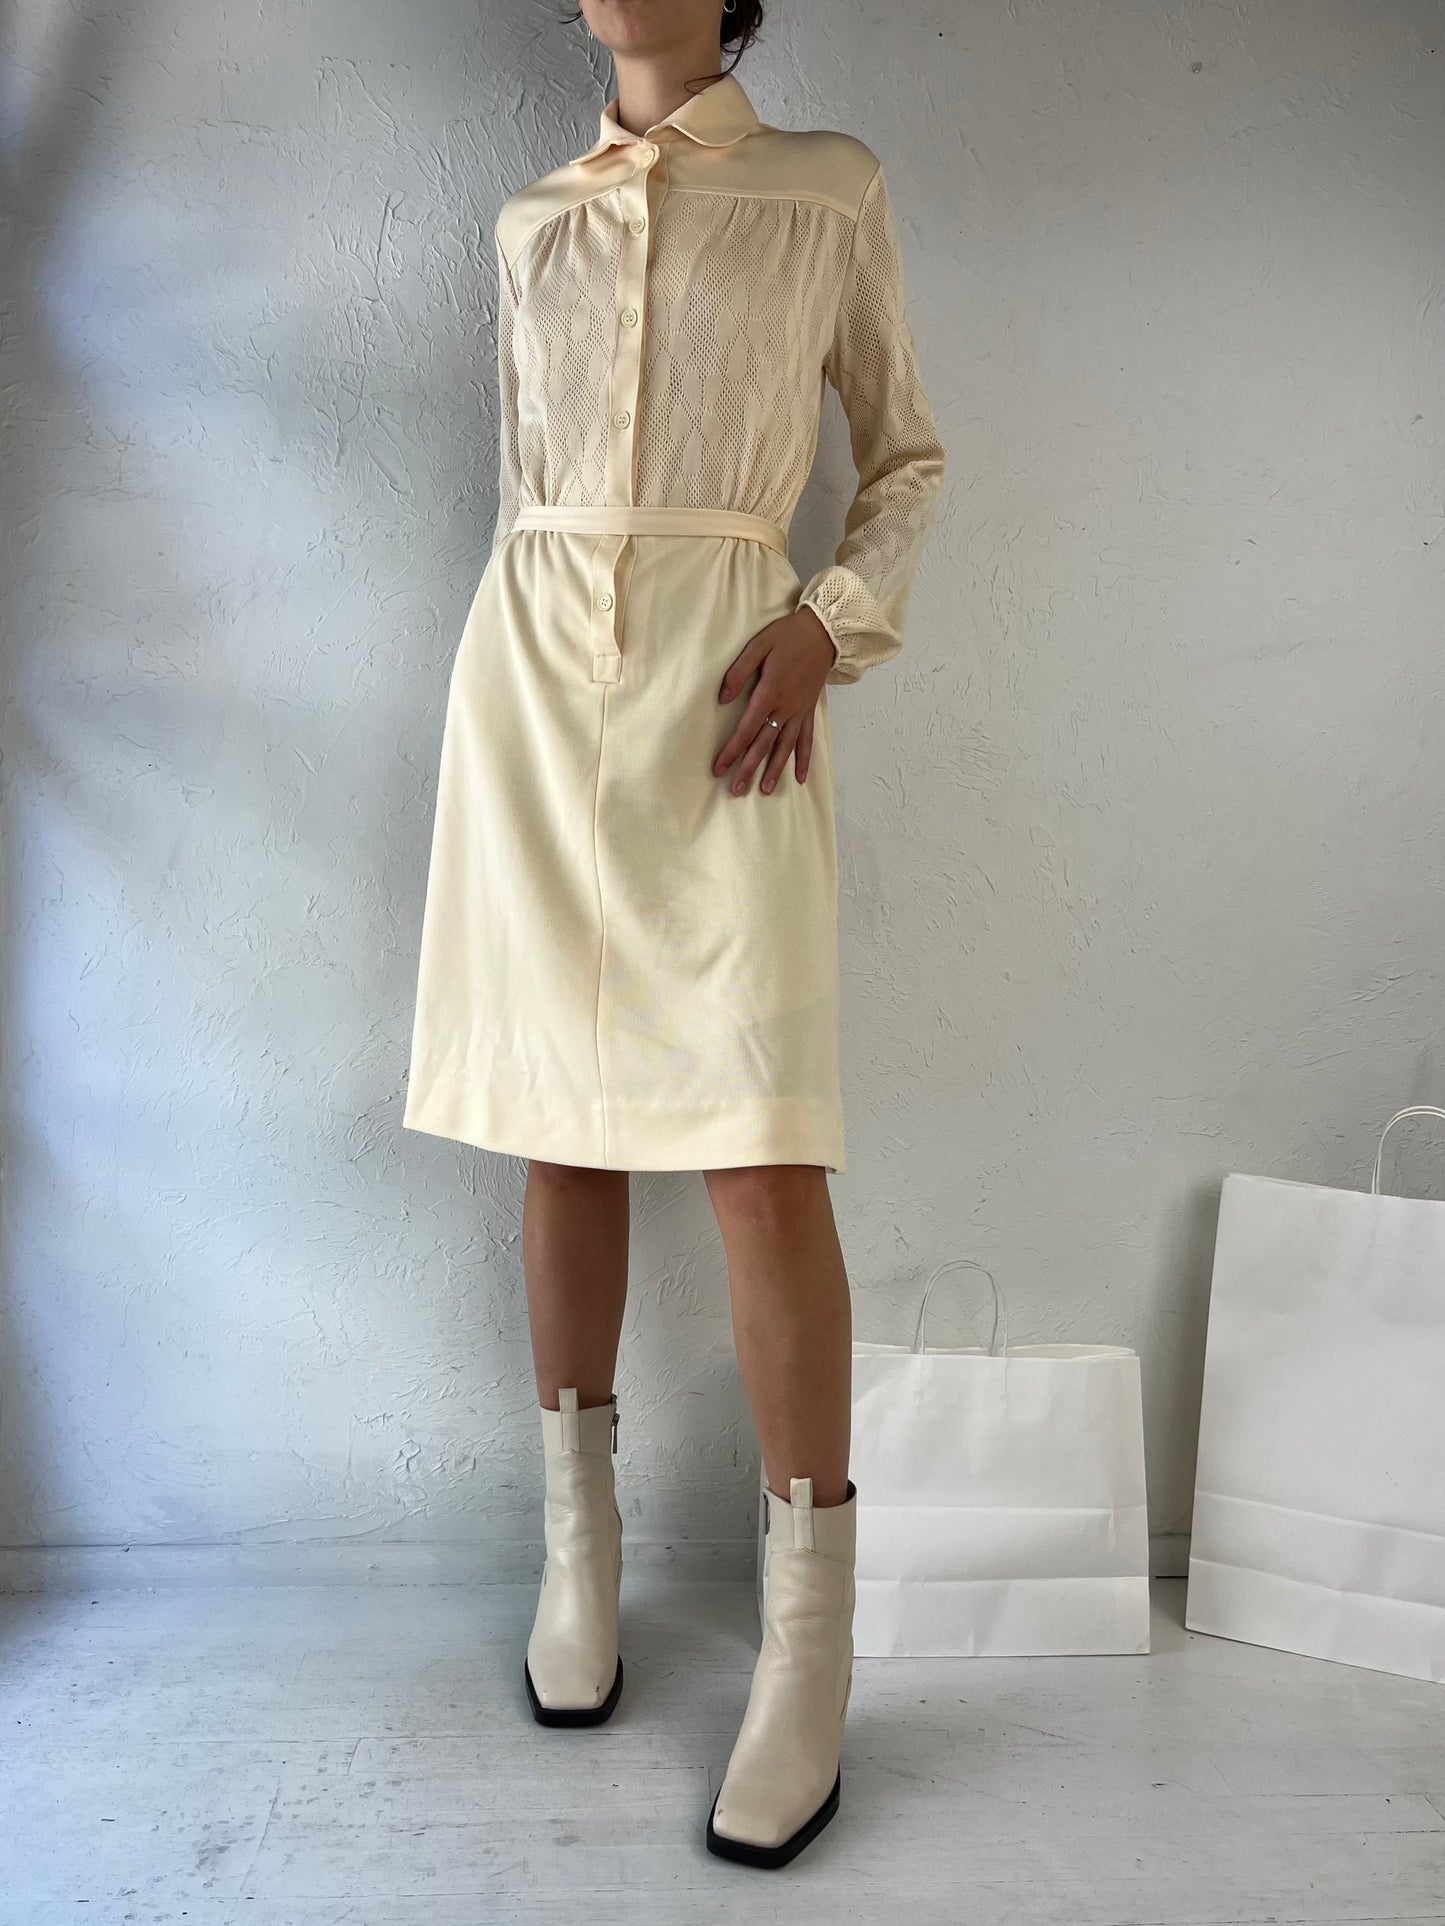 80s 'Stage T' Cream Polyester Collared Dress / Small